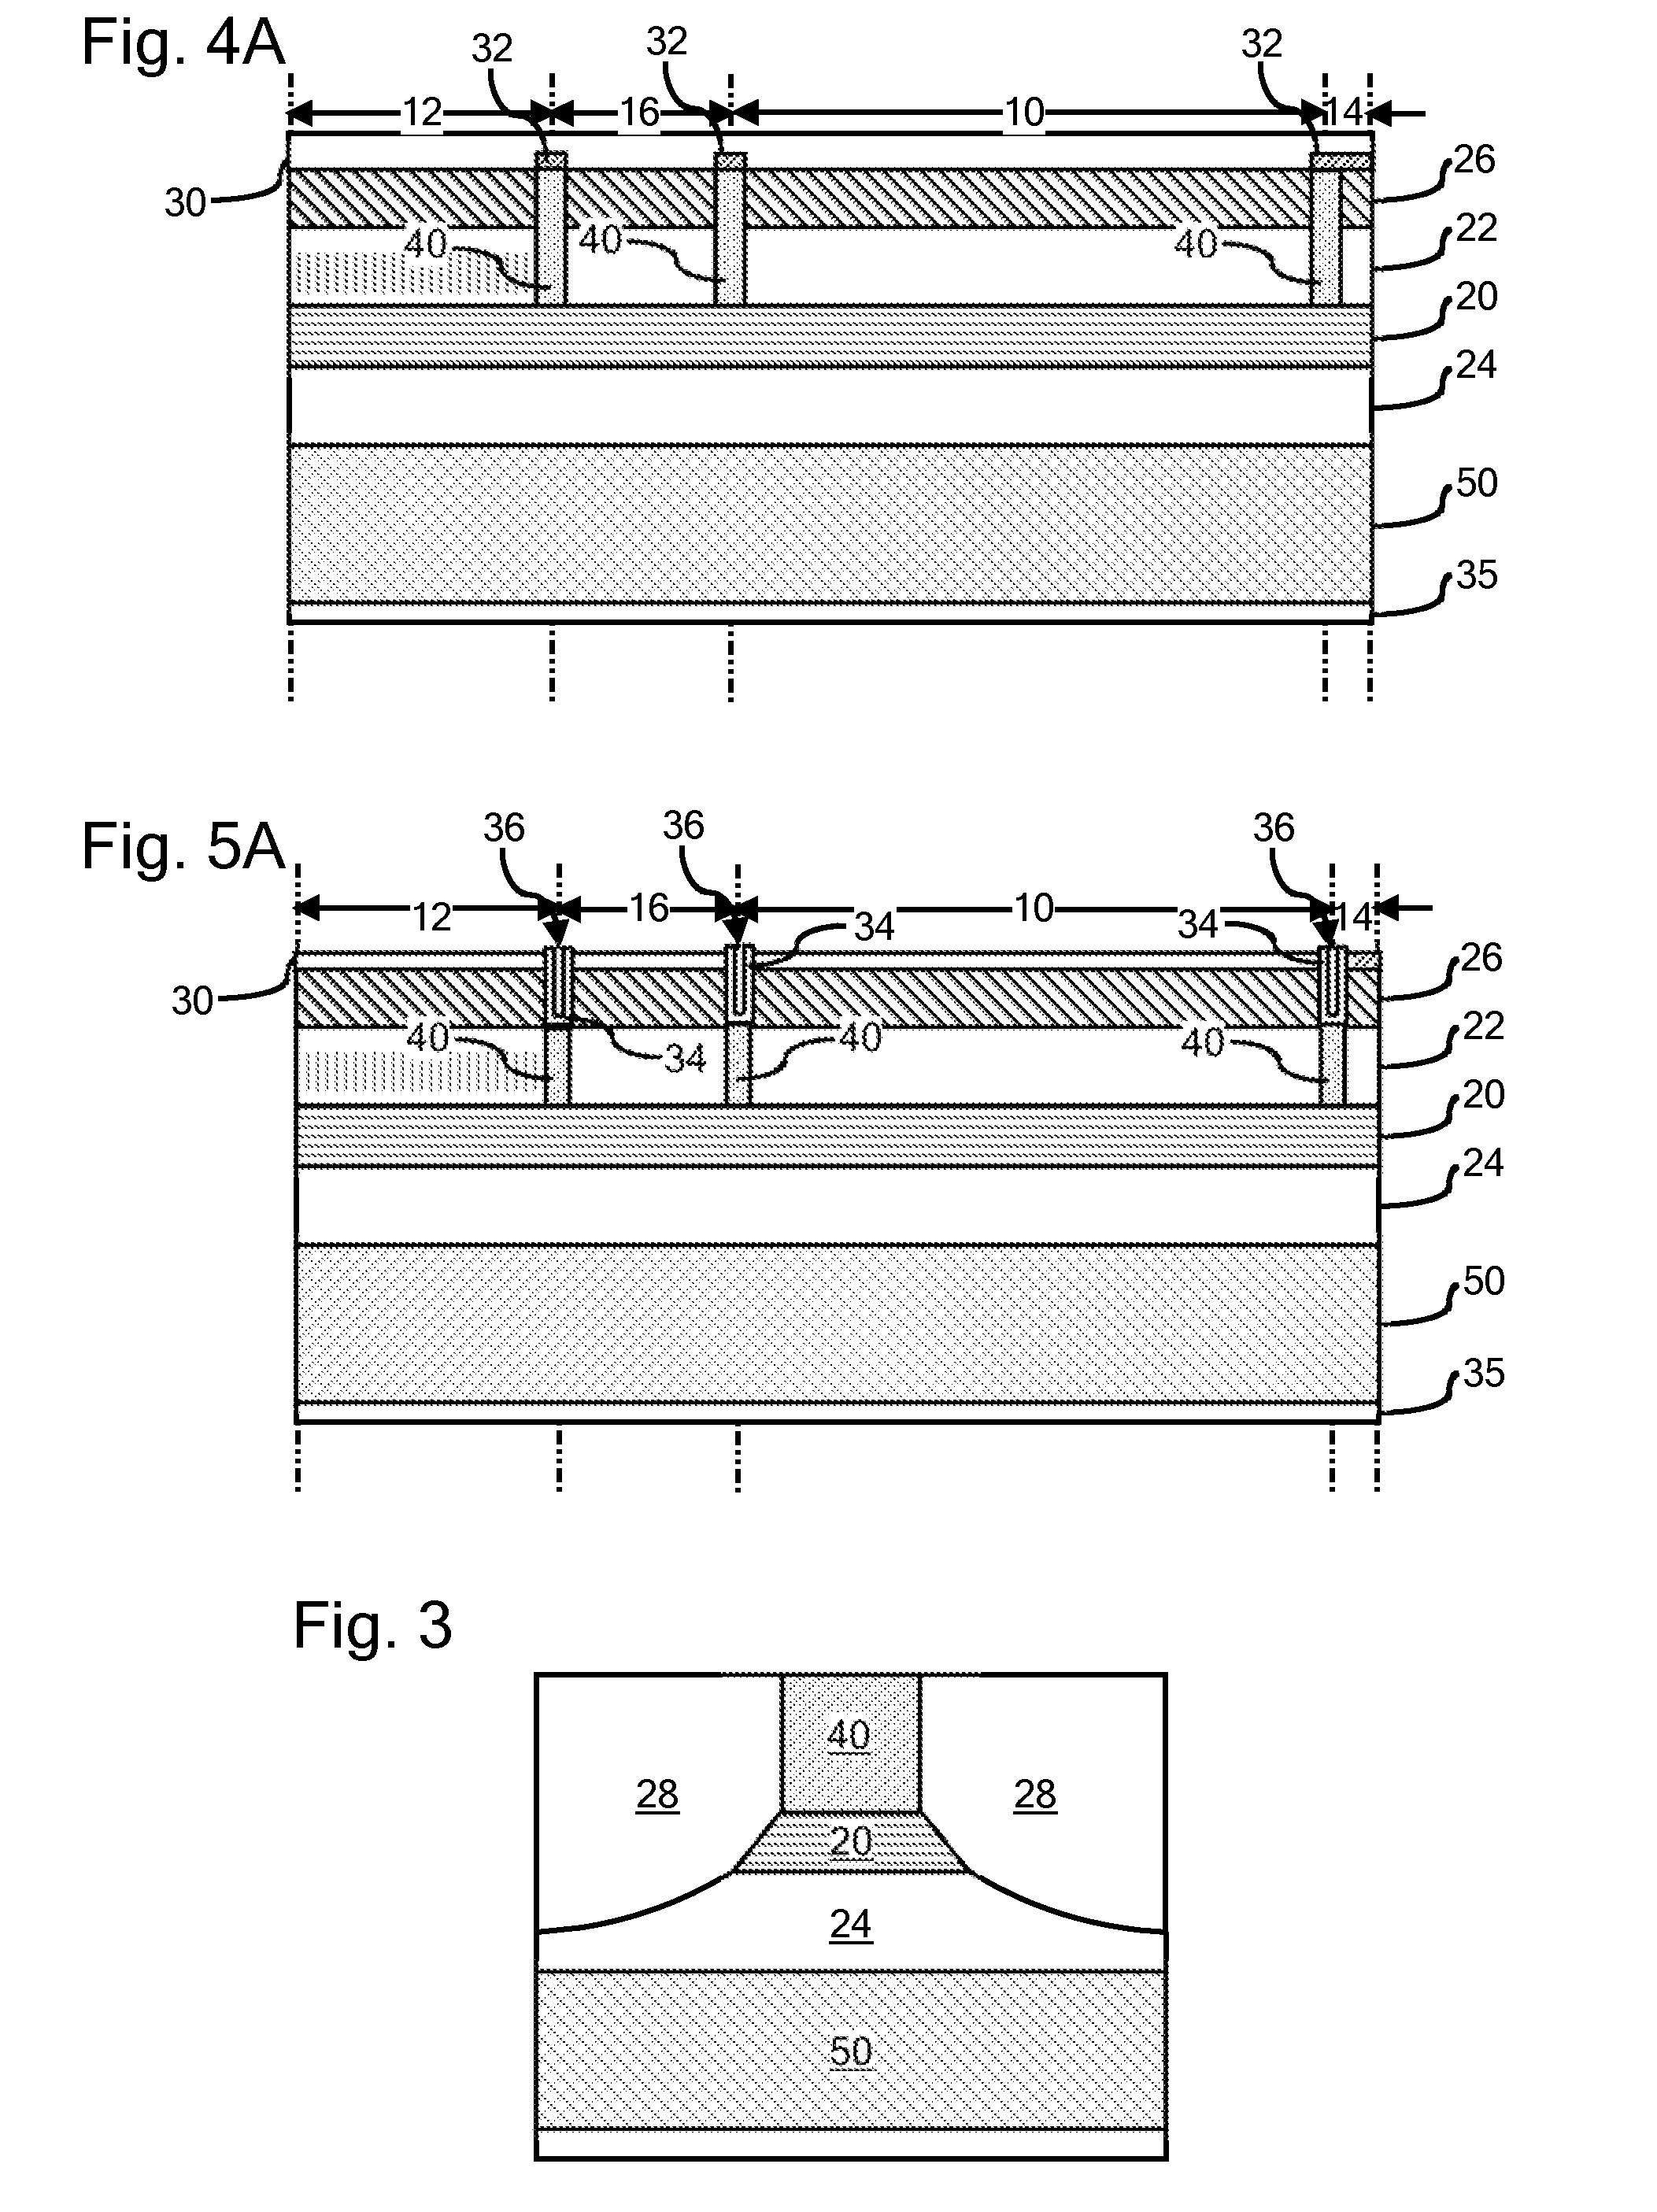 P-type isolation regions adjacent to semiconductor laser facets